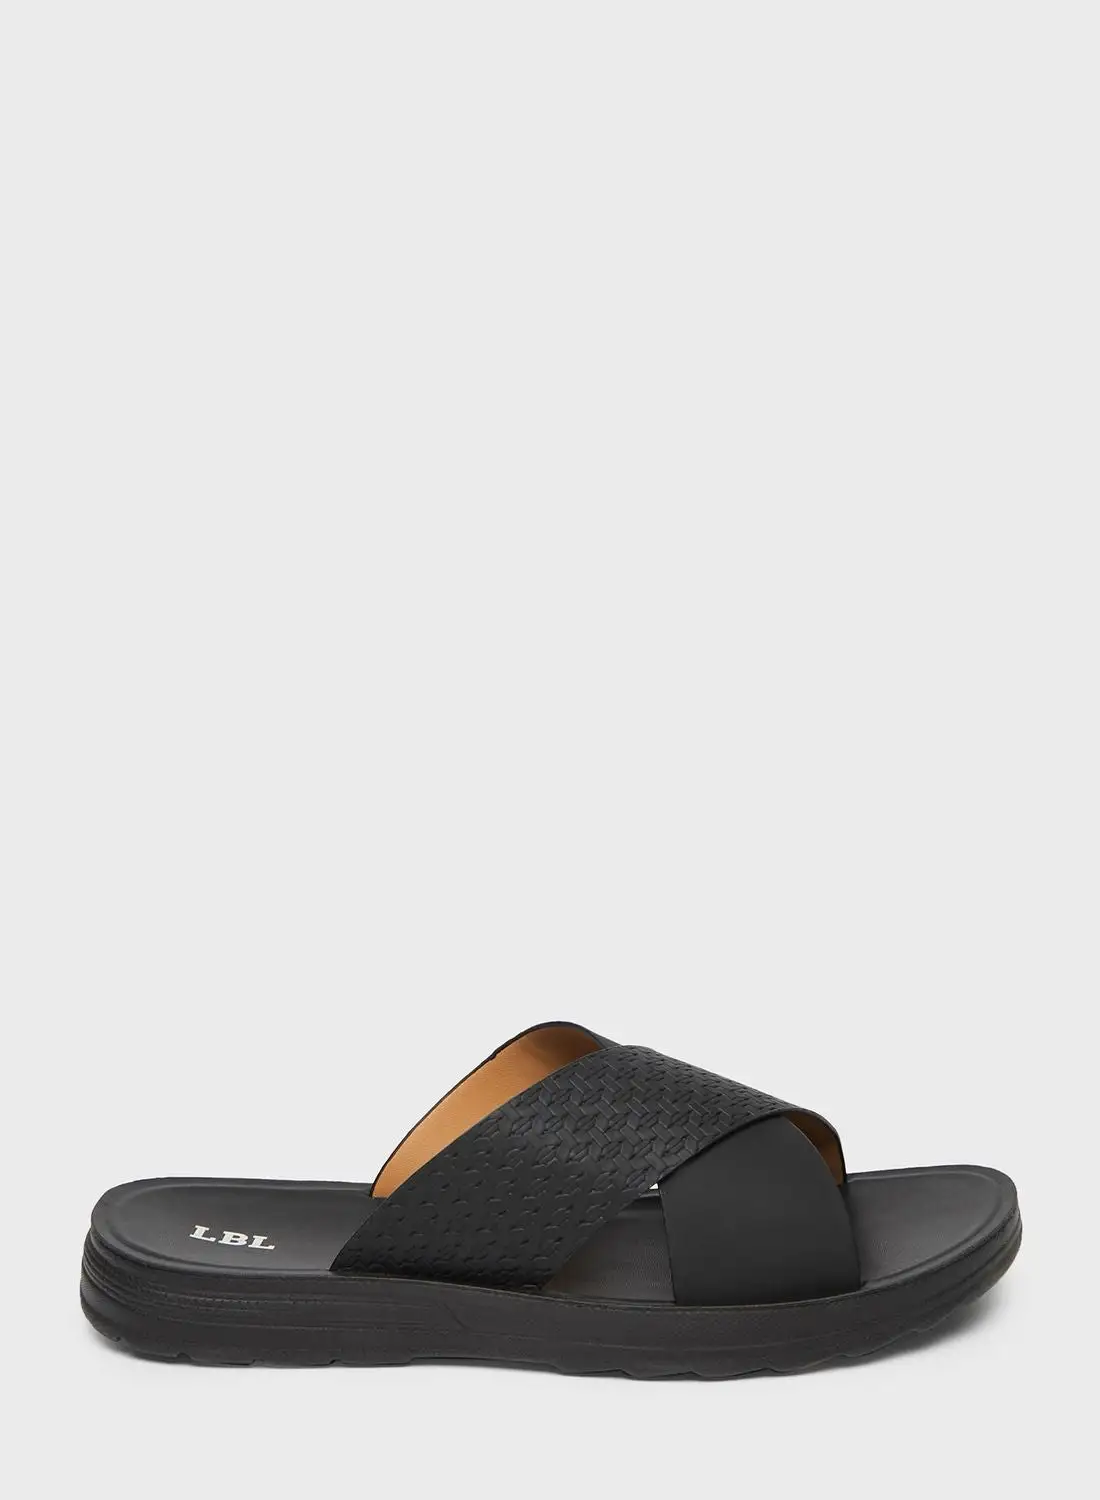 LBL by Shoexpress Casual Comfort Arabic Sandals